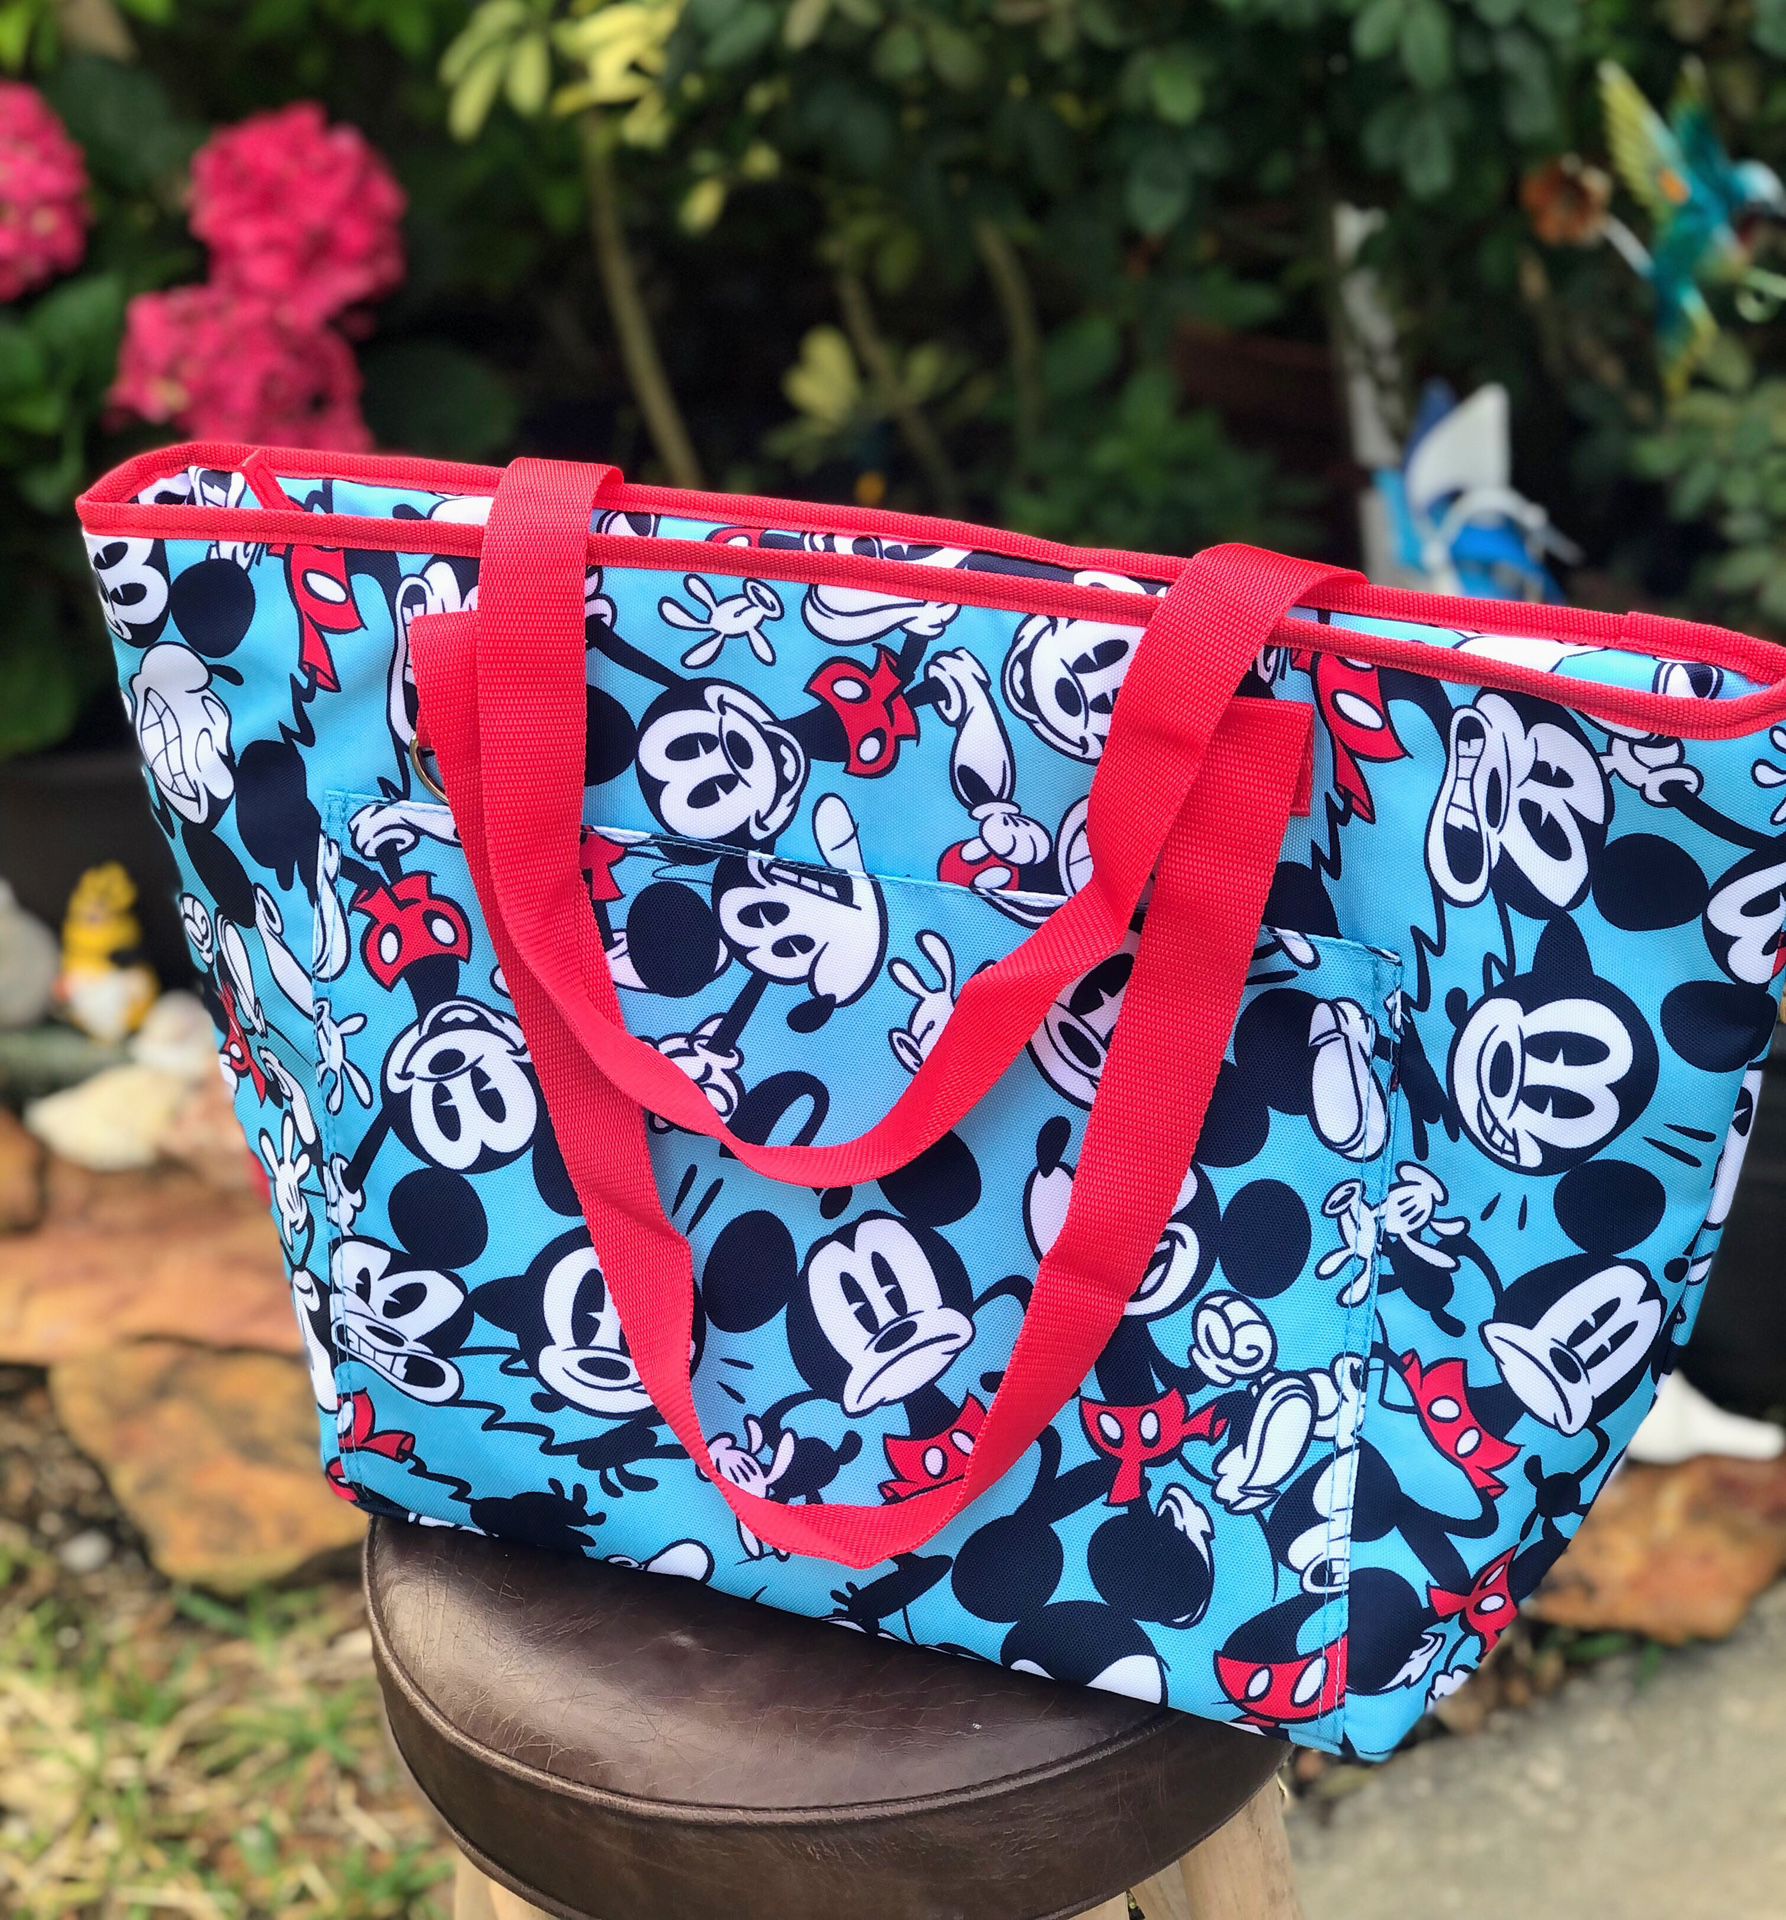 Mickey Mouse Picnic, Shopping Cooler Tote Bag See Details 